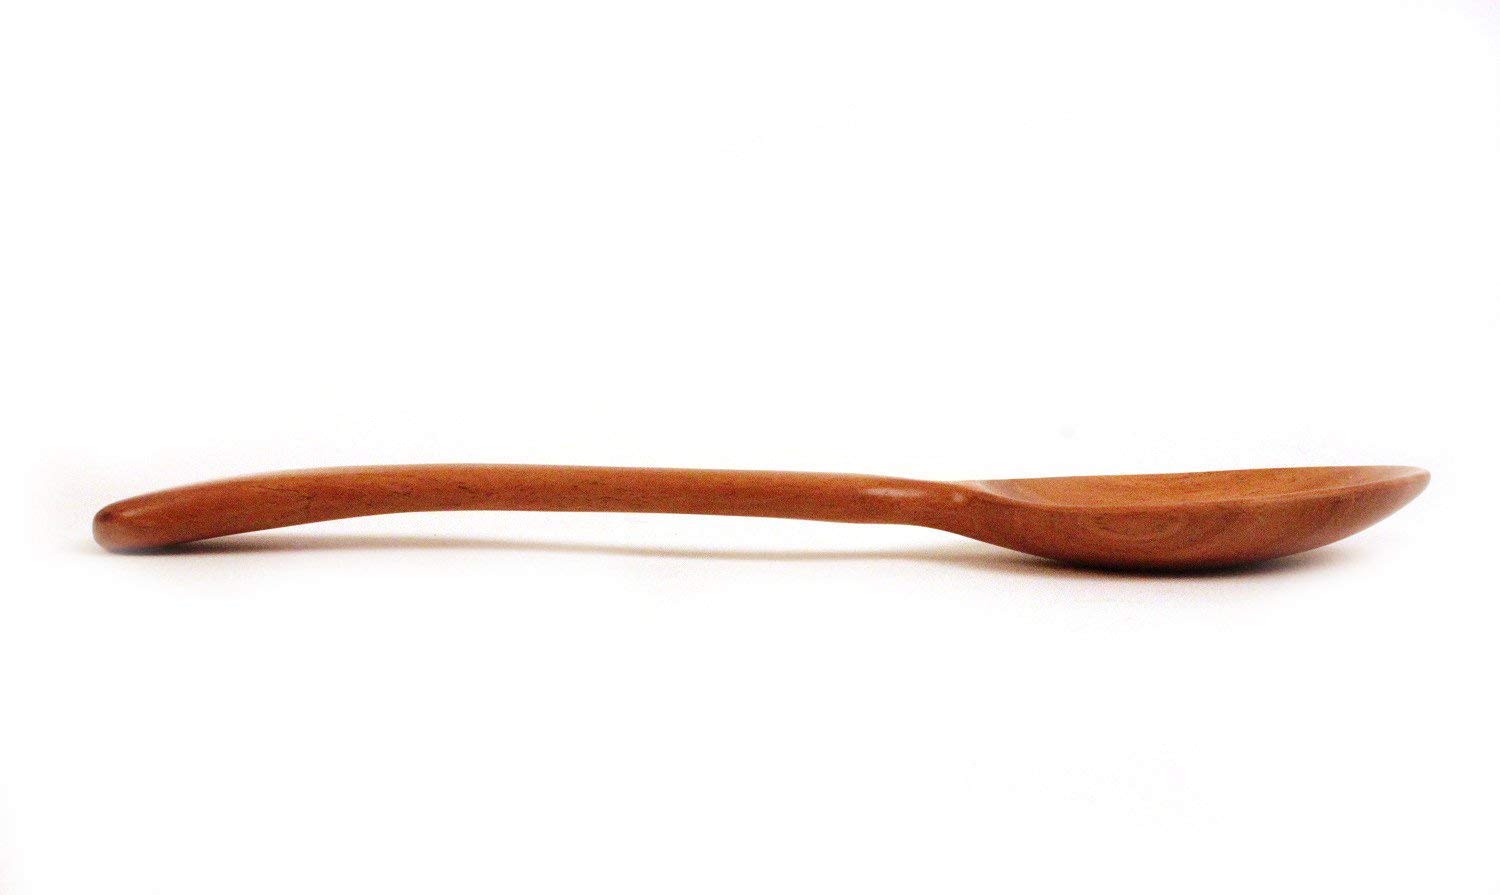 The Indus Valley Neem Wood Cooking Ladle - Saute